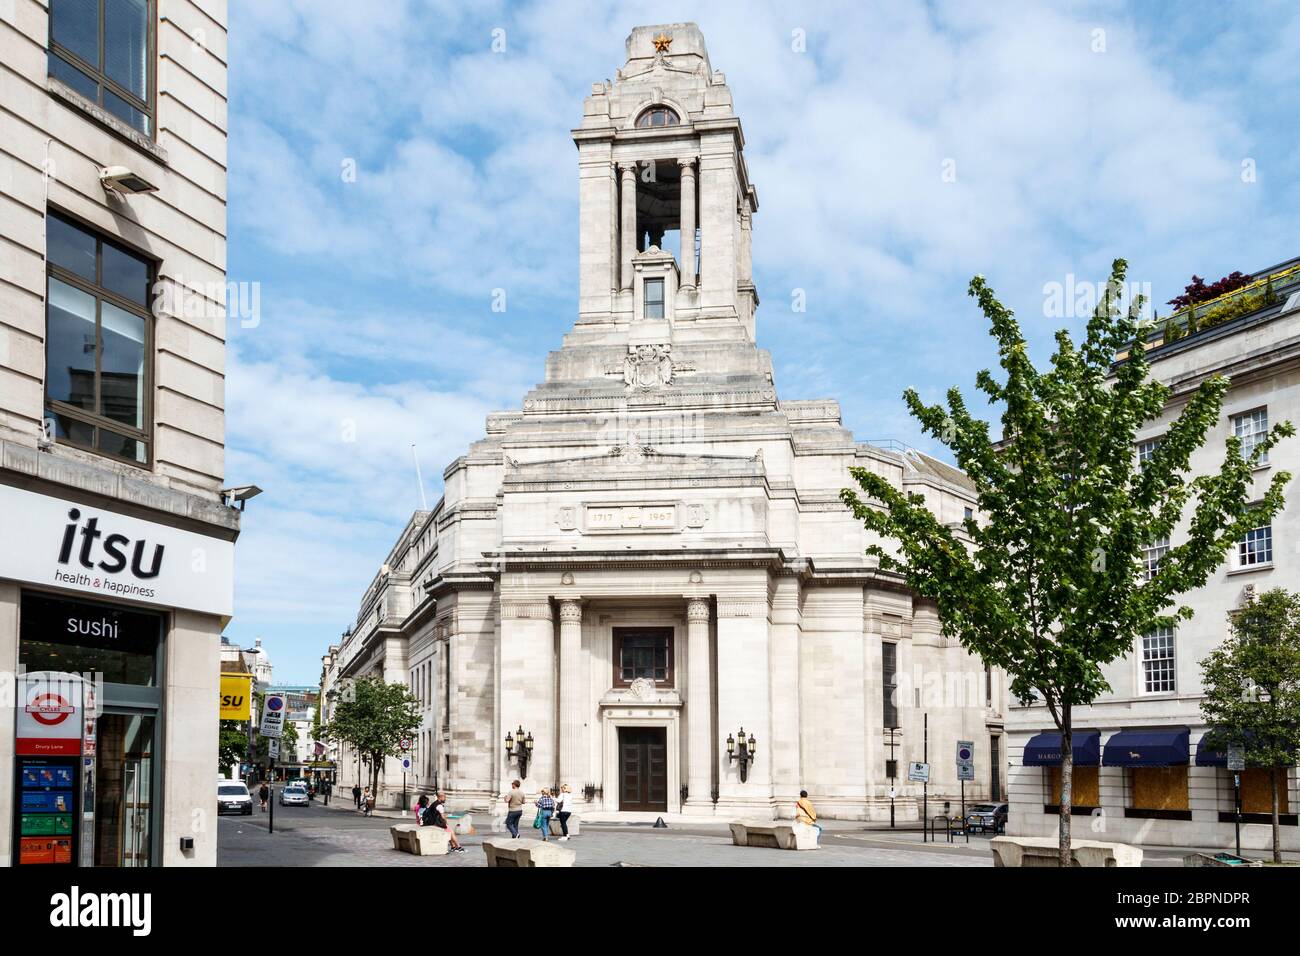 Freemasons' Hall, the headquarters of the United Grand Lodge of England, Great Queen Street, London, UK Stock Photo